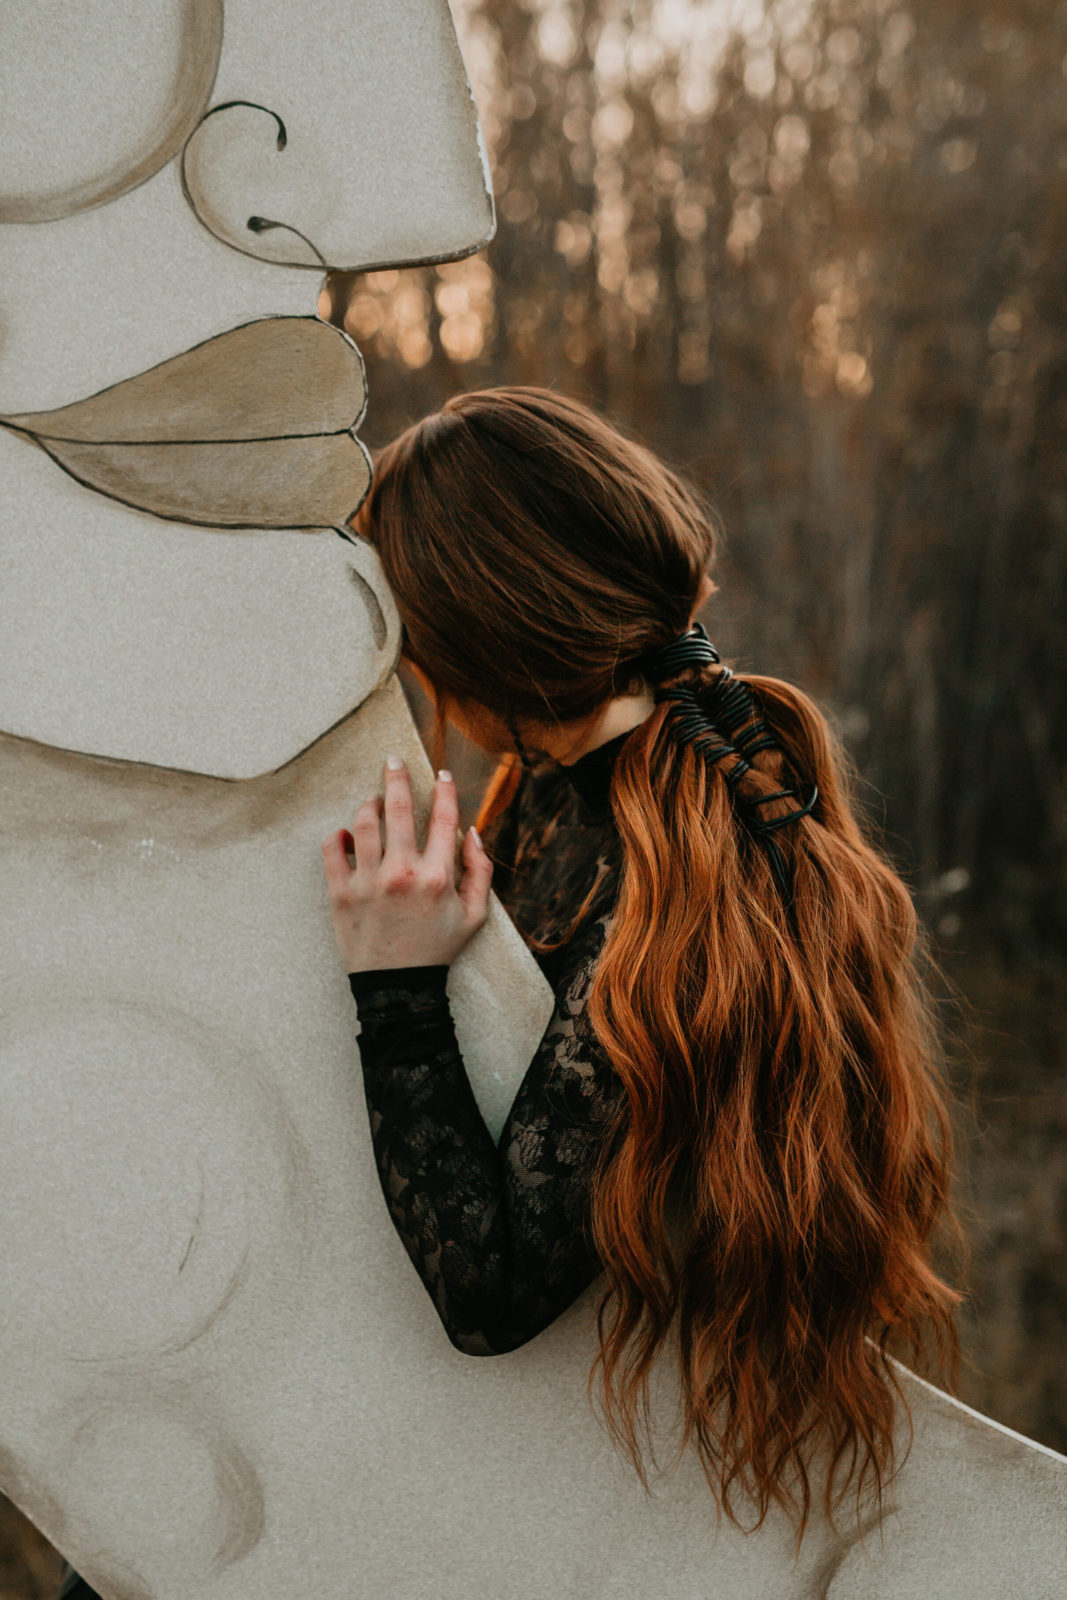 Ginger, Spice, & Everything Not Very Nice // Spooky Halloween Inspiration Shoot in Red Deer, Halloween Inspiration, Halloween Costume, Red Deer Wedding Vendors, Hair Inspiration, Red Hair inspo